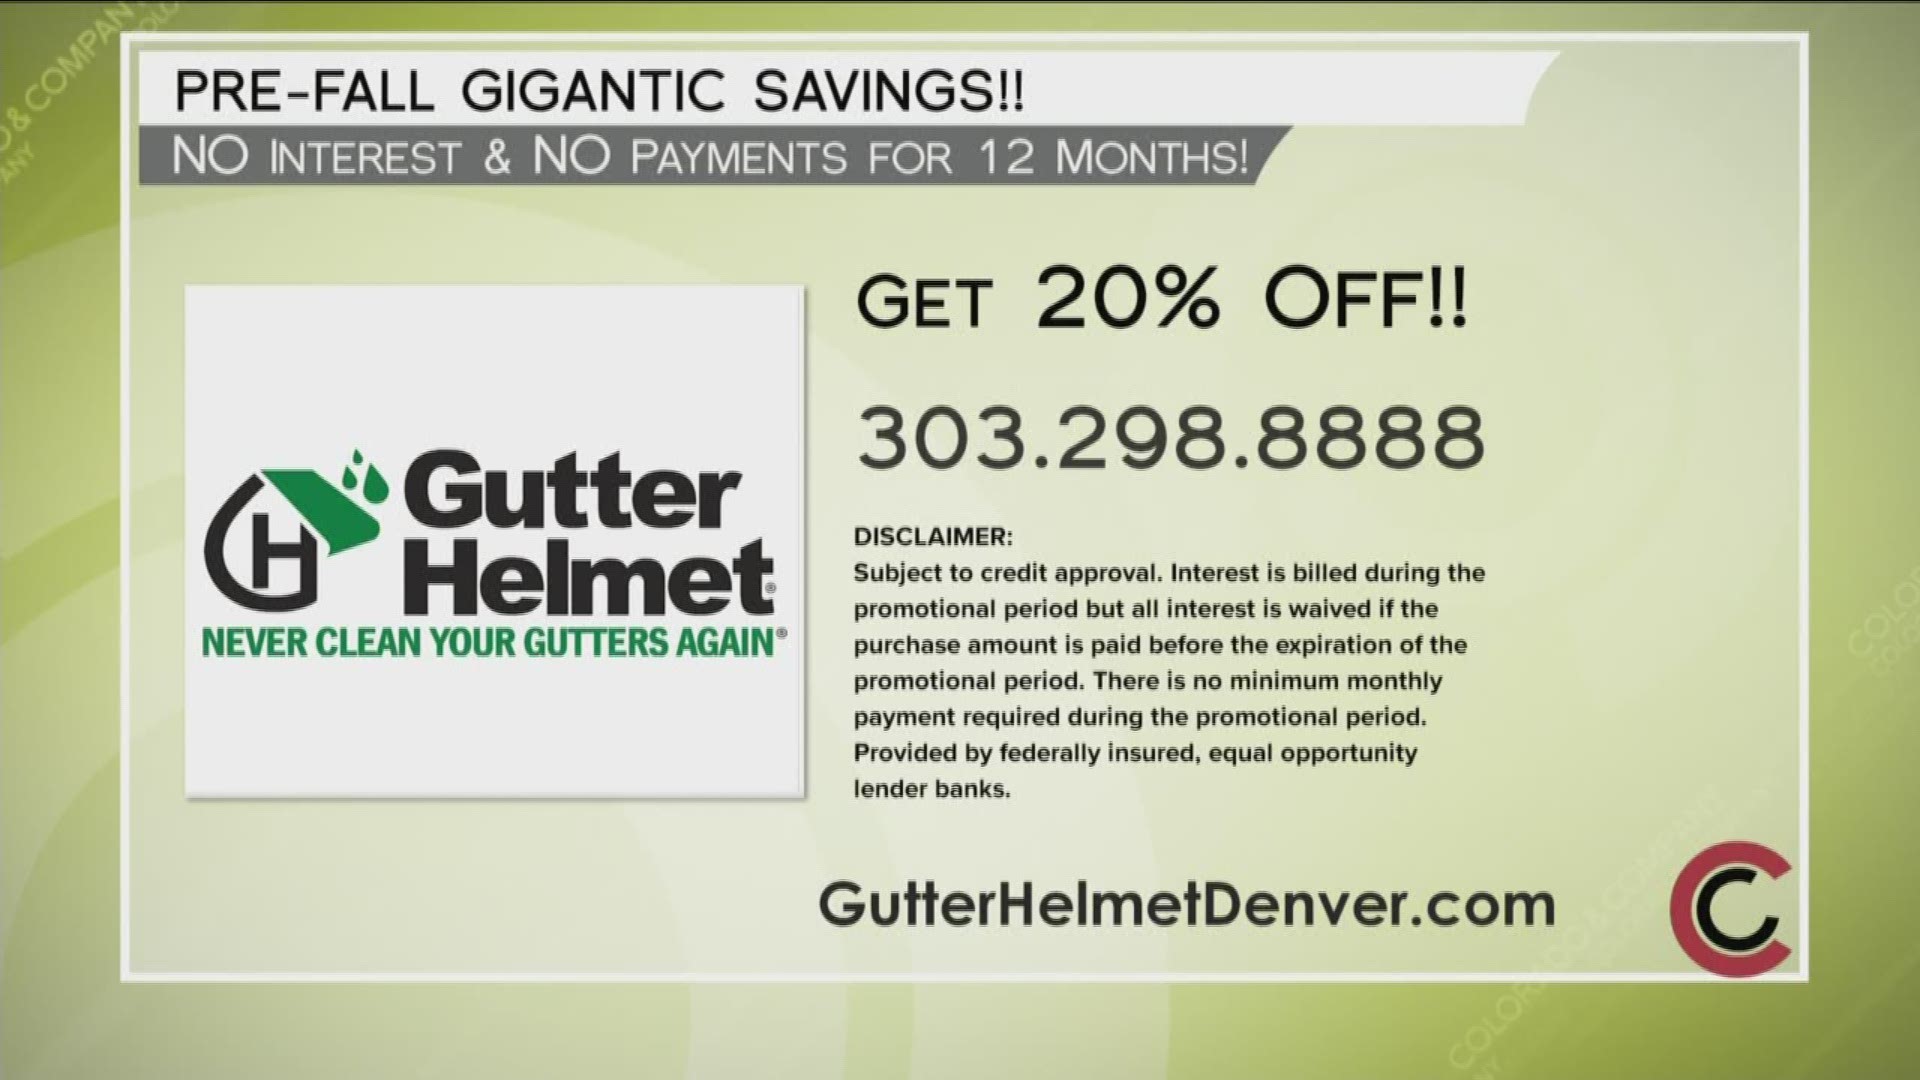 Never clean your gutters again! Gutter Helmet is offering CoCo viewers a great deal—Book an appointment today and get 20% off, along with no interest and no payments for 12 months! Call 303.298.8888 or visit www.GutterHelmetDenver.com for more information. 
THIS INTERVIEW HAS COMMERCIAL CONTENT. PRODUCTS AND SERVICES FEATURED APPEAR AS PAID ADVERTISING.